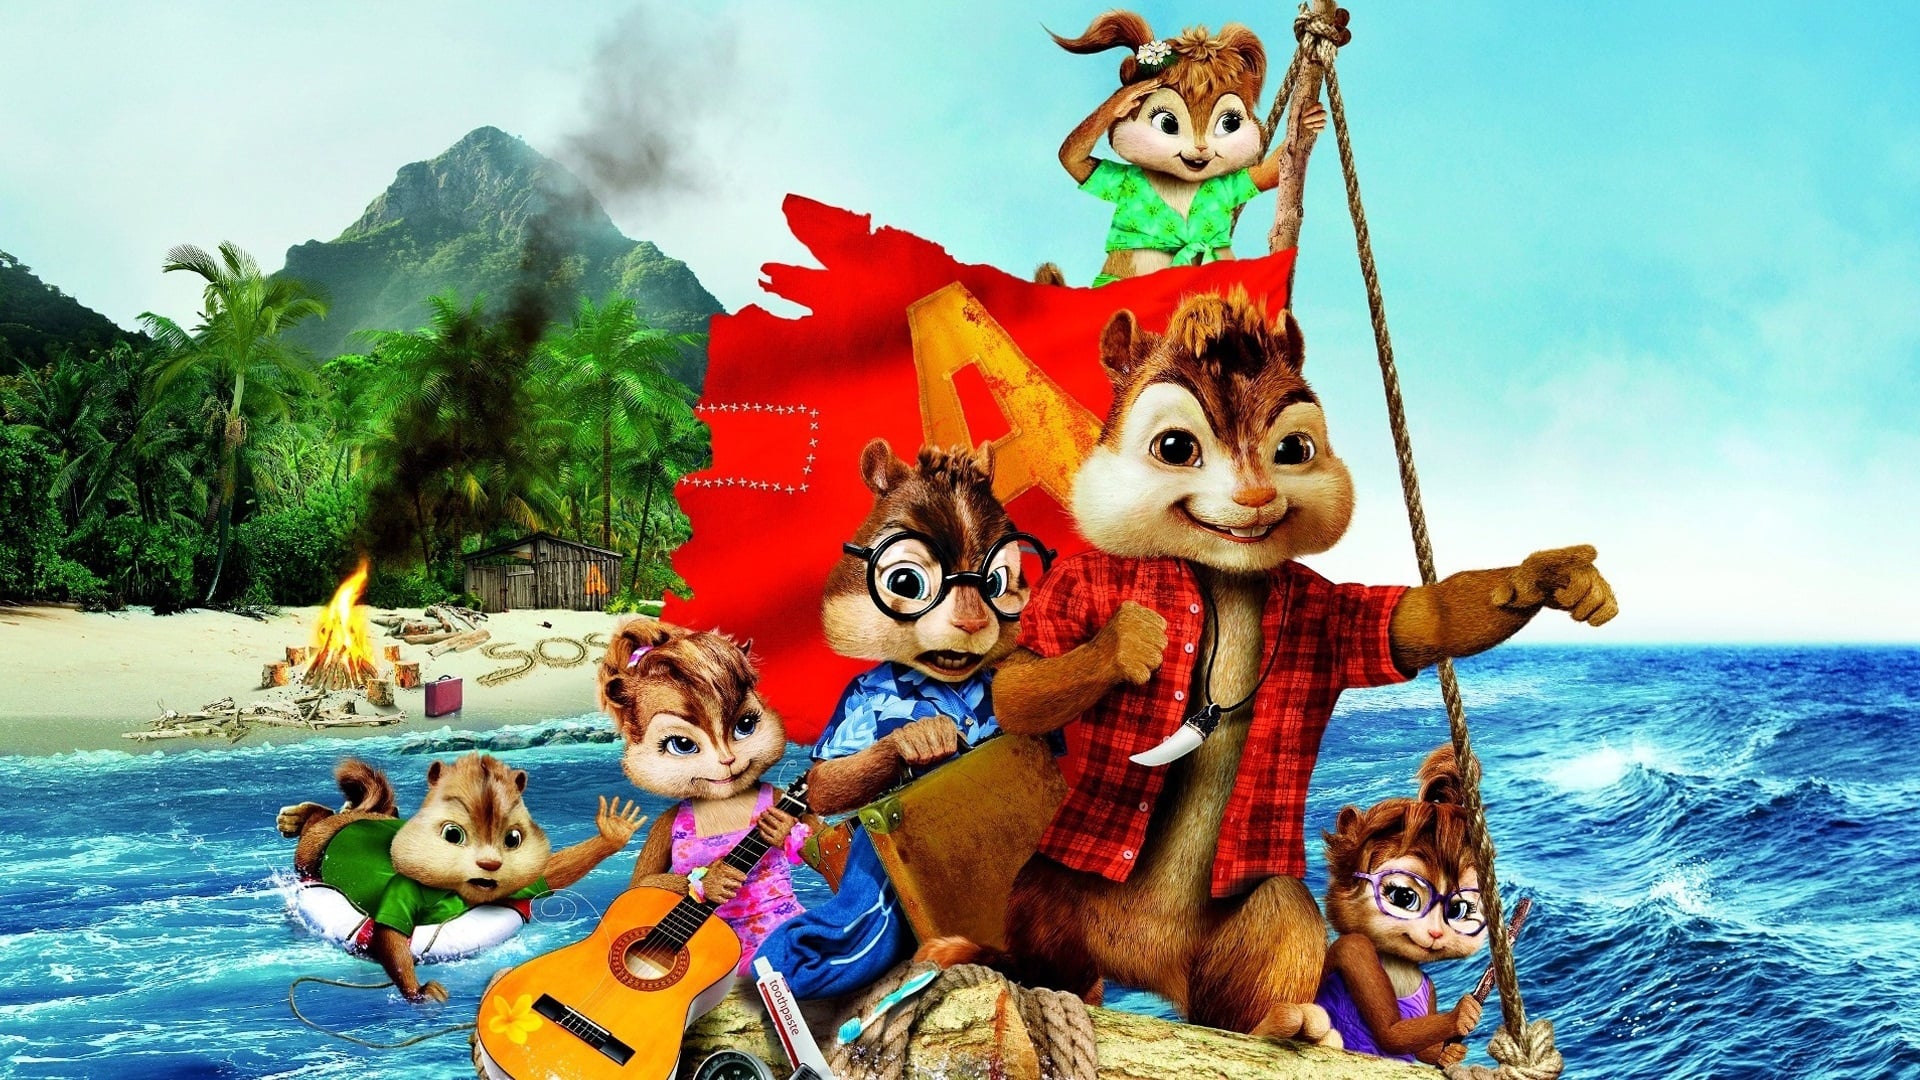 Alvin and the Chipmunks: Chipwrecked Soundtrack Music - Complete Song List  | Tunefind